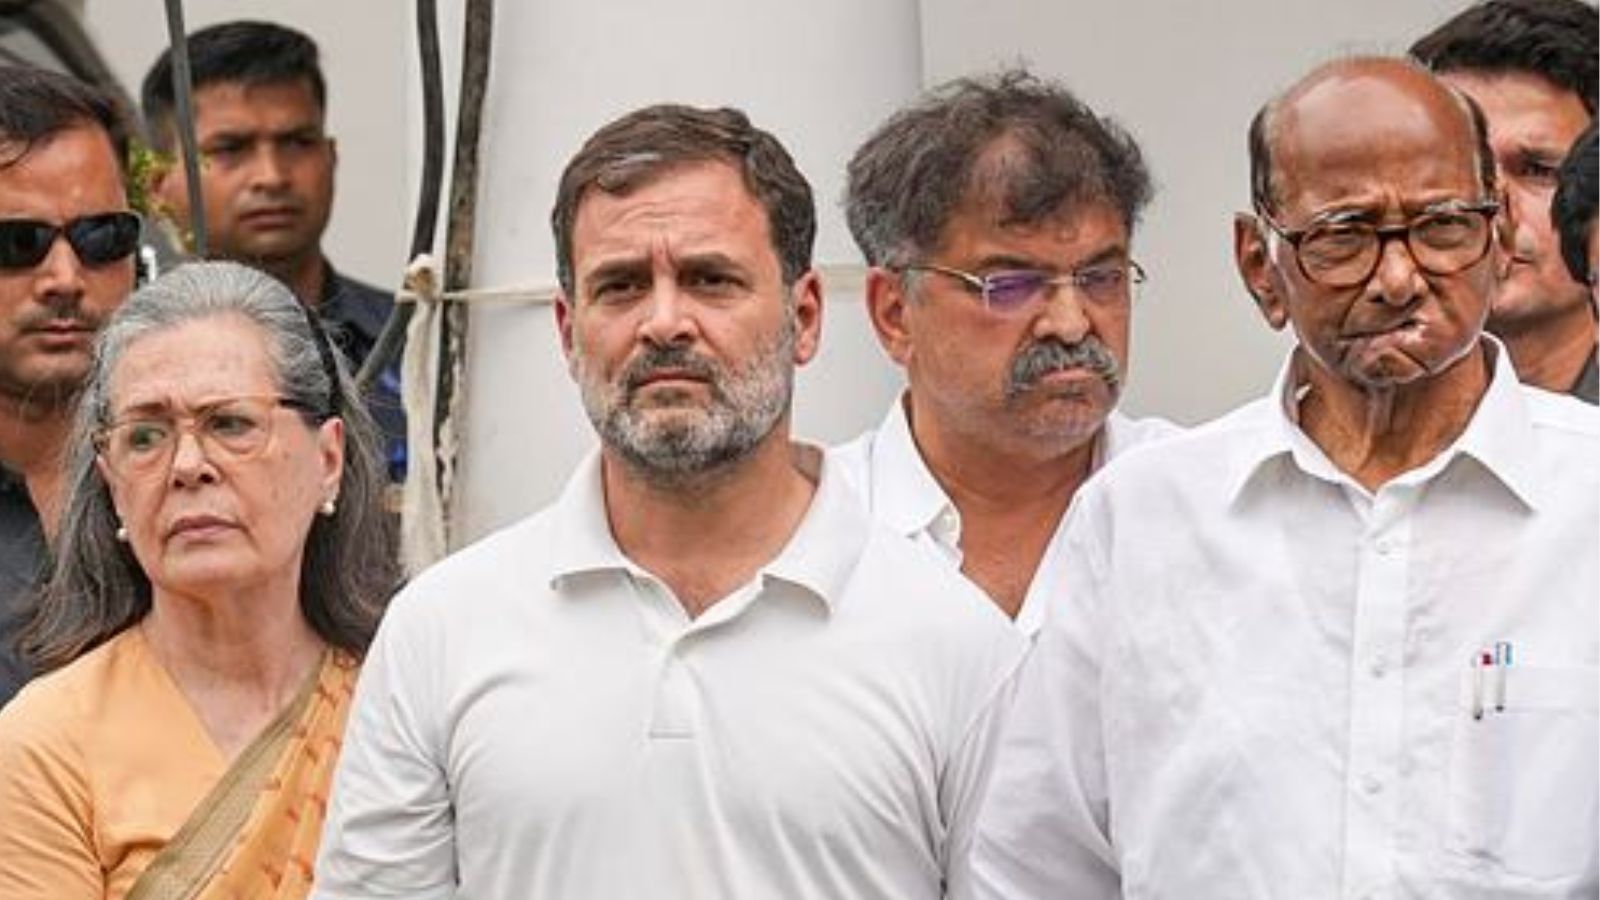 On Saturday, top leaders of the INDIA bloc met and claimed that the Opposition bloc would cross the halfway mark of 272. The meeting saw many leaders saying the Congress’s decision to stay away from exit poll debates on television channels would send a wrong message.